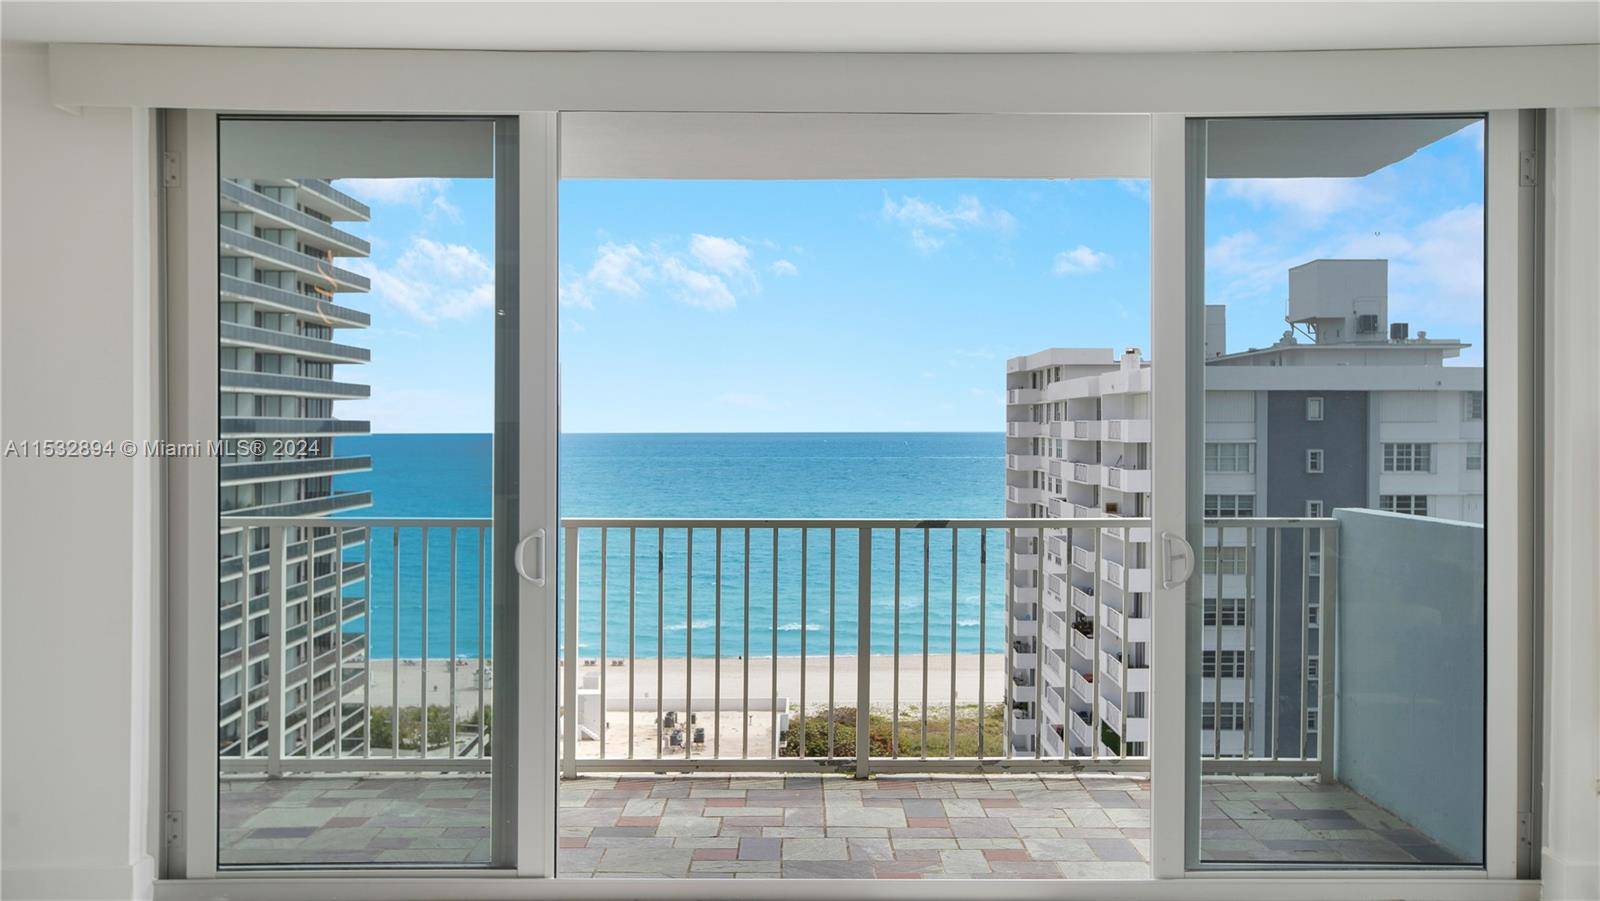 Spectacular 2 bed, 2 bath condo with ocean and intracoastal views, situated in a prime location on Collins Avenue.